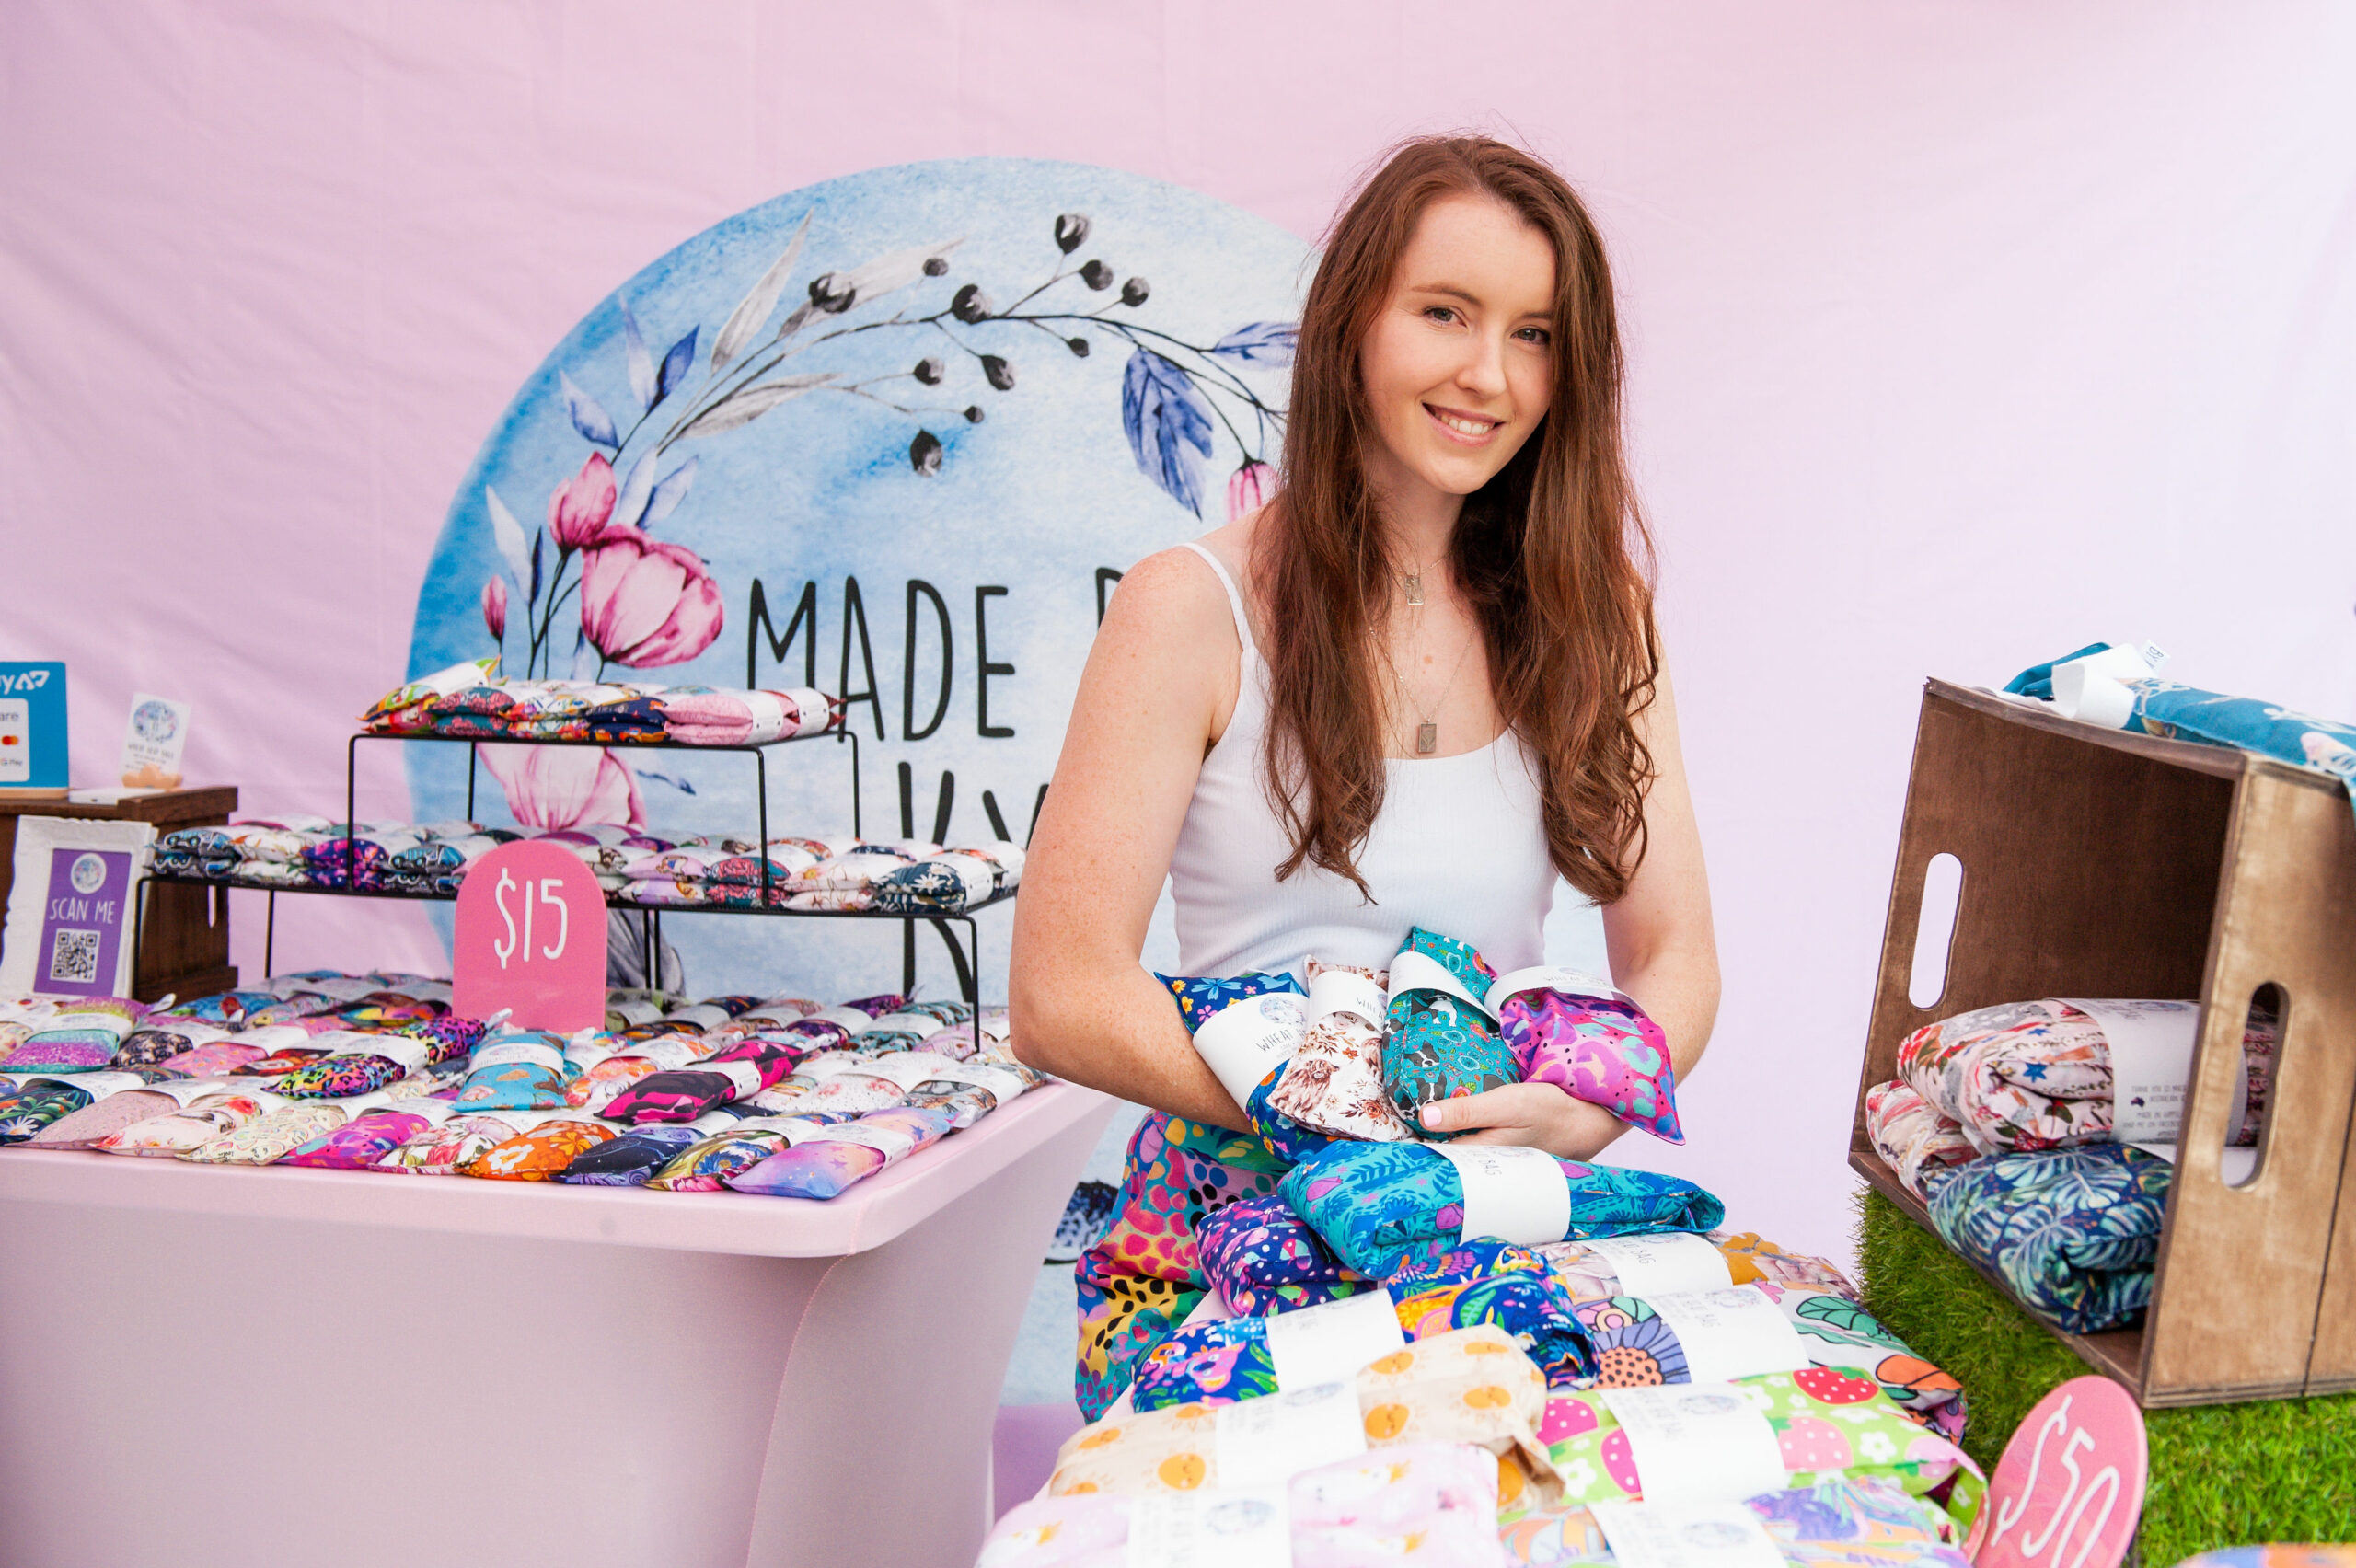 Quirky fabrics and wheat bags helped this business owner deal with pain